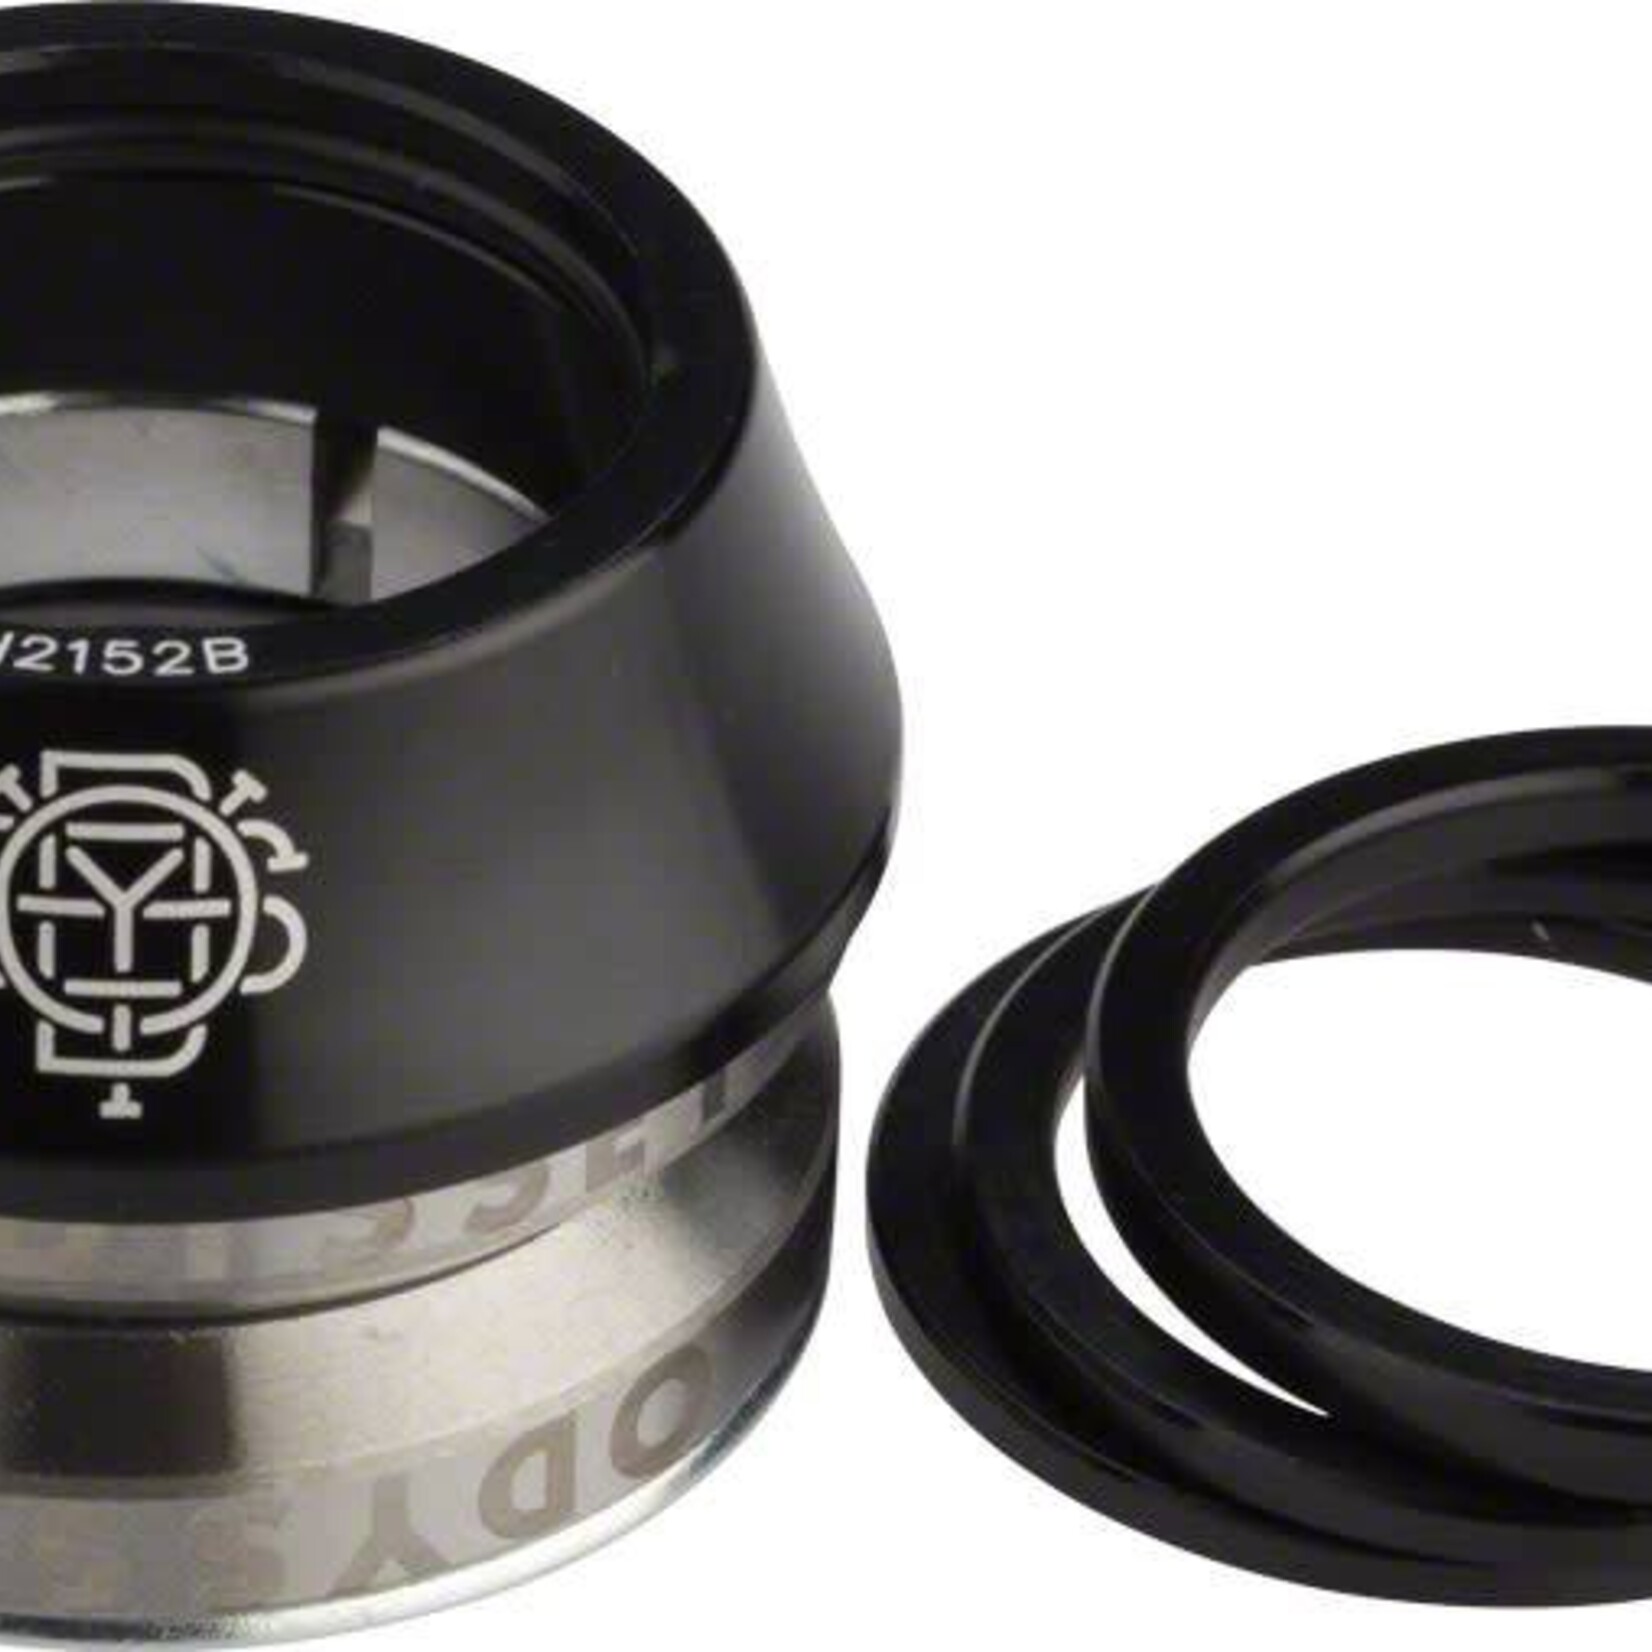 Odyssey Odyssey Integrated 1-1/8" 45x45 Black Headset with Conical Spacer